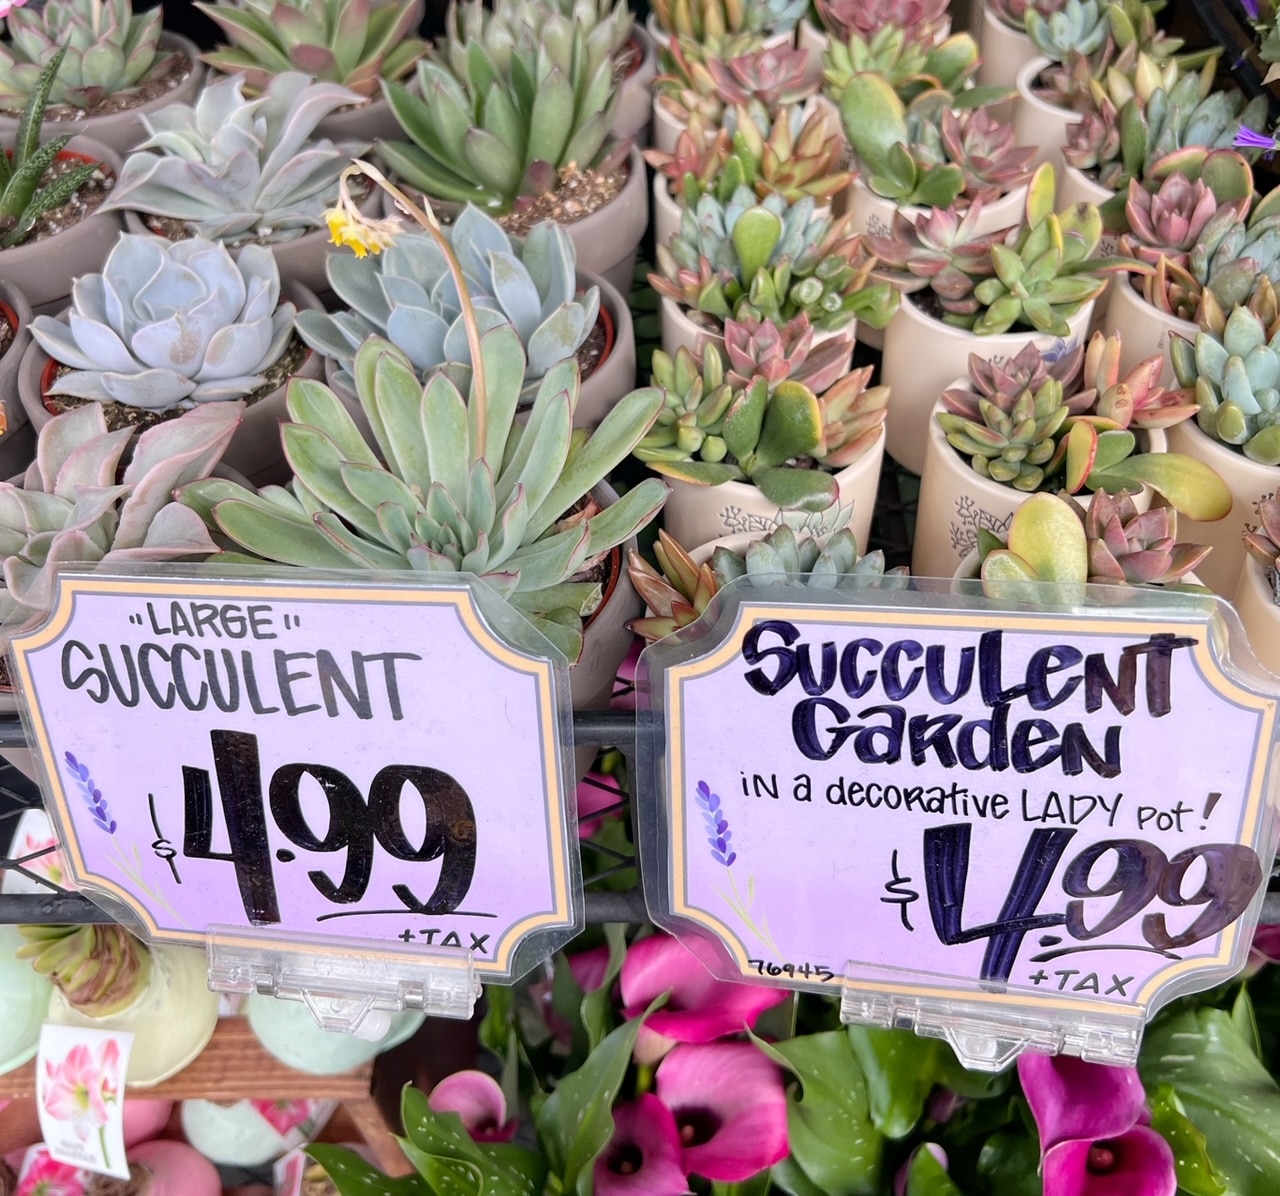 Succulents at Traders Joes for $4.99